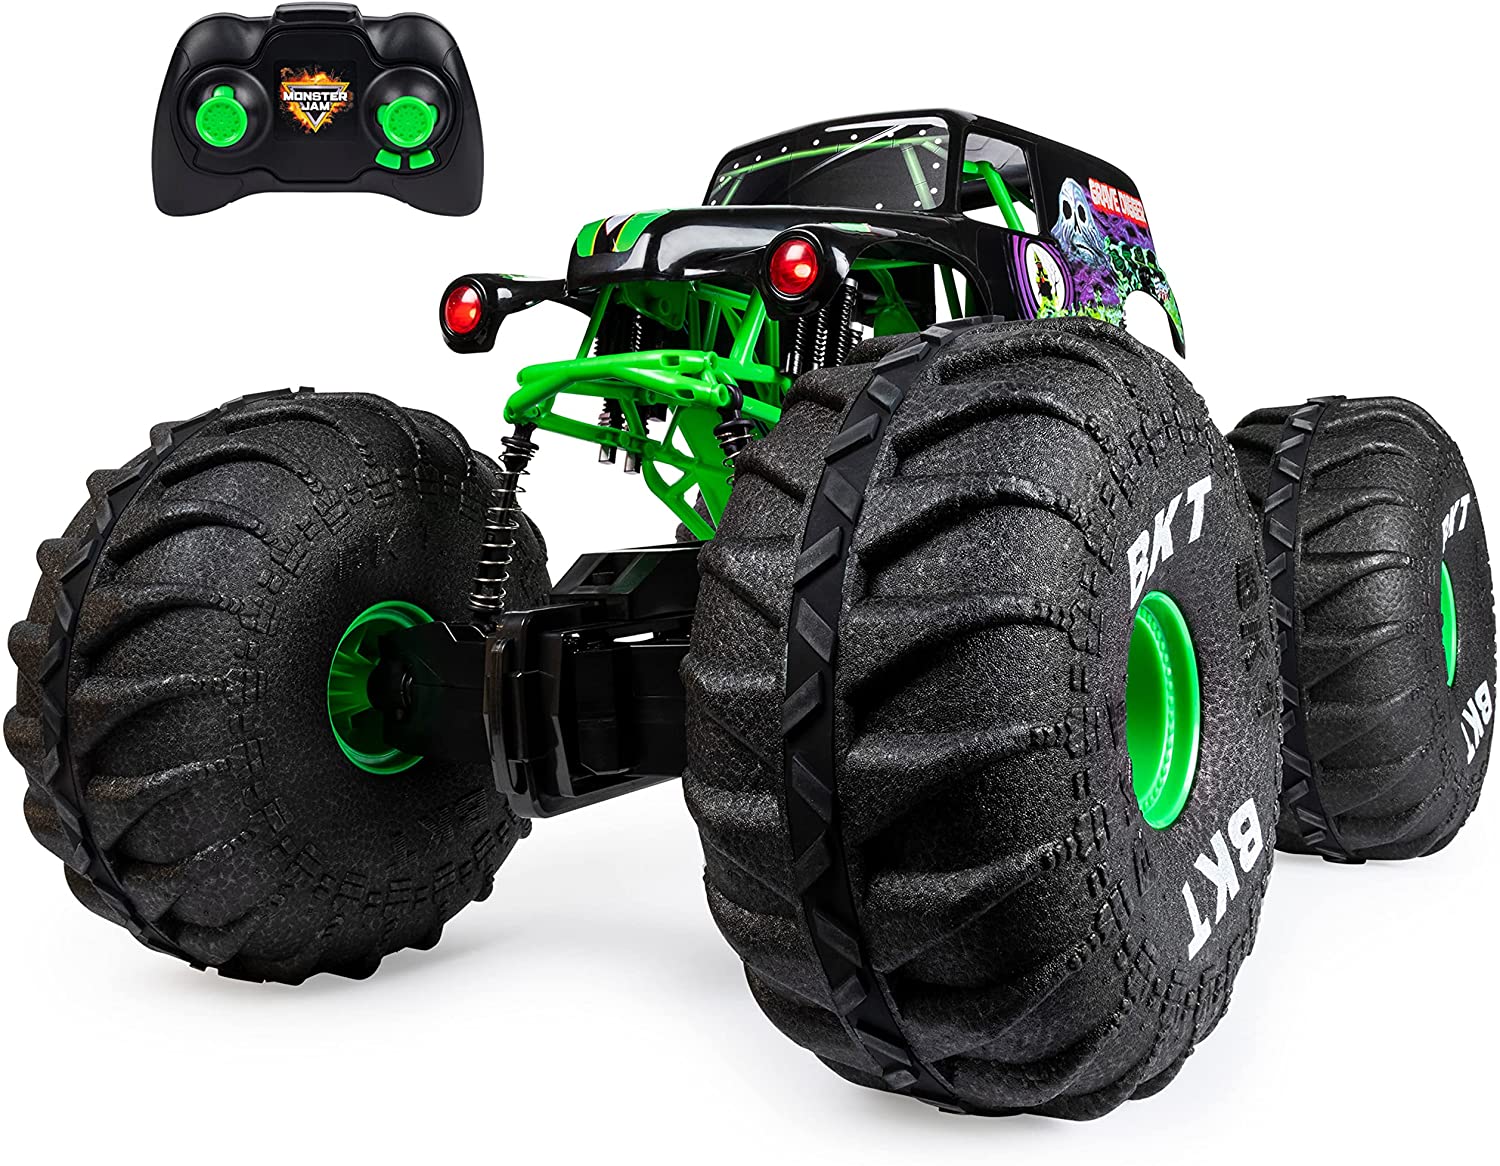 Monster Jam 1:6 Scale Official Mega Grave Digger All-Terrain Remote Control Monster Truck w/ Lights $55 + Free Shipping